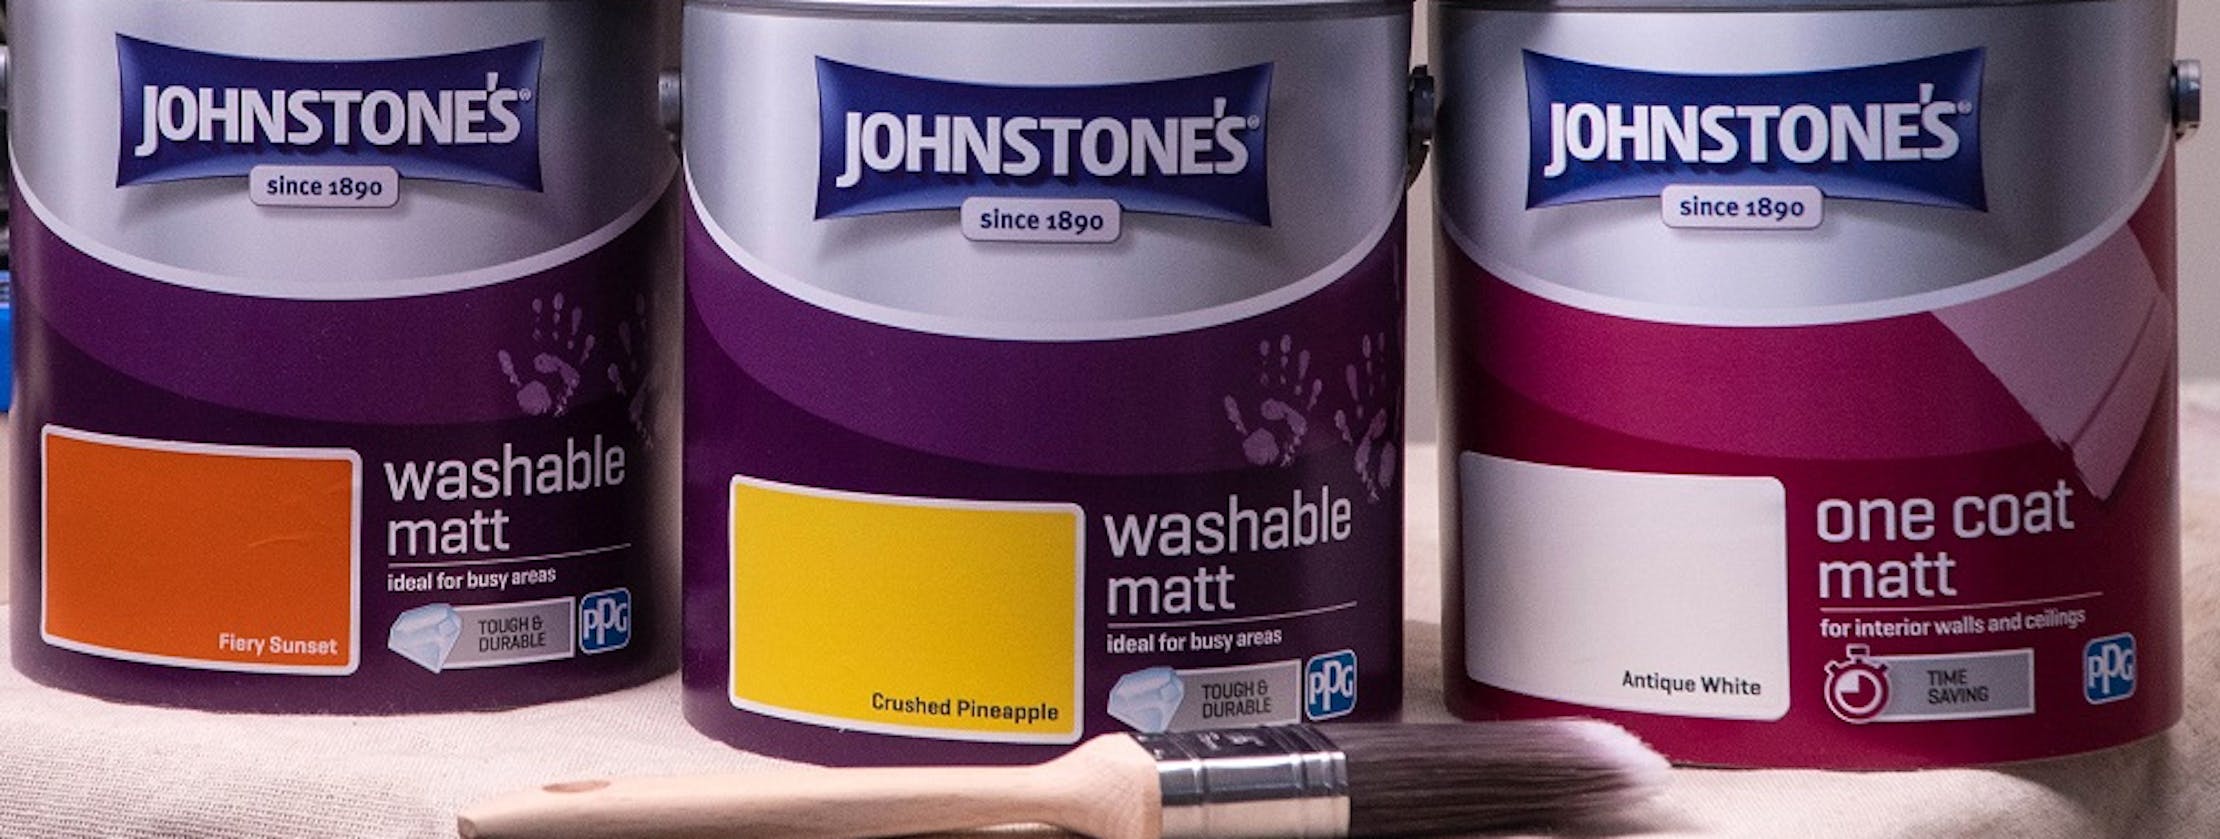 front view of johnstone's paint tins